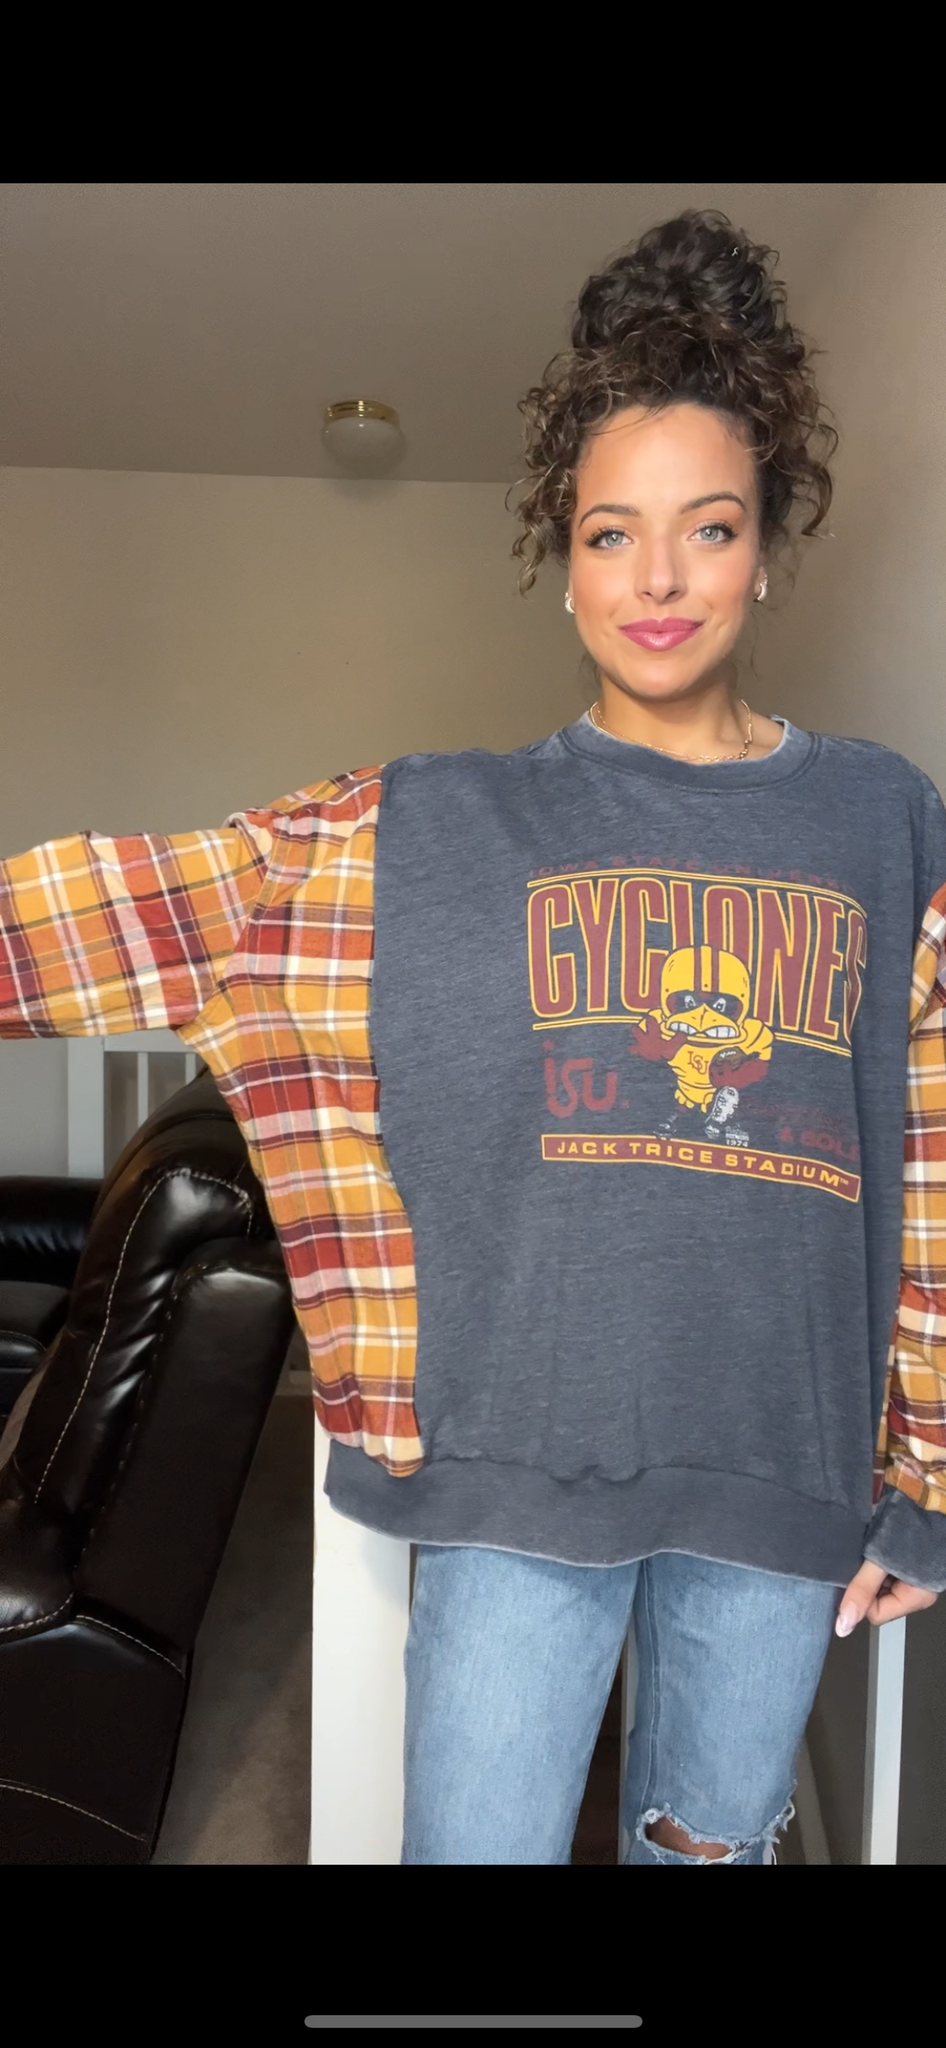 Upcycled Cyclones – women’s 1X/2X – thin French terry sweatshirt with flannel sleeves￼